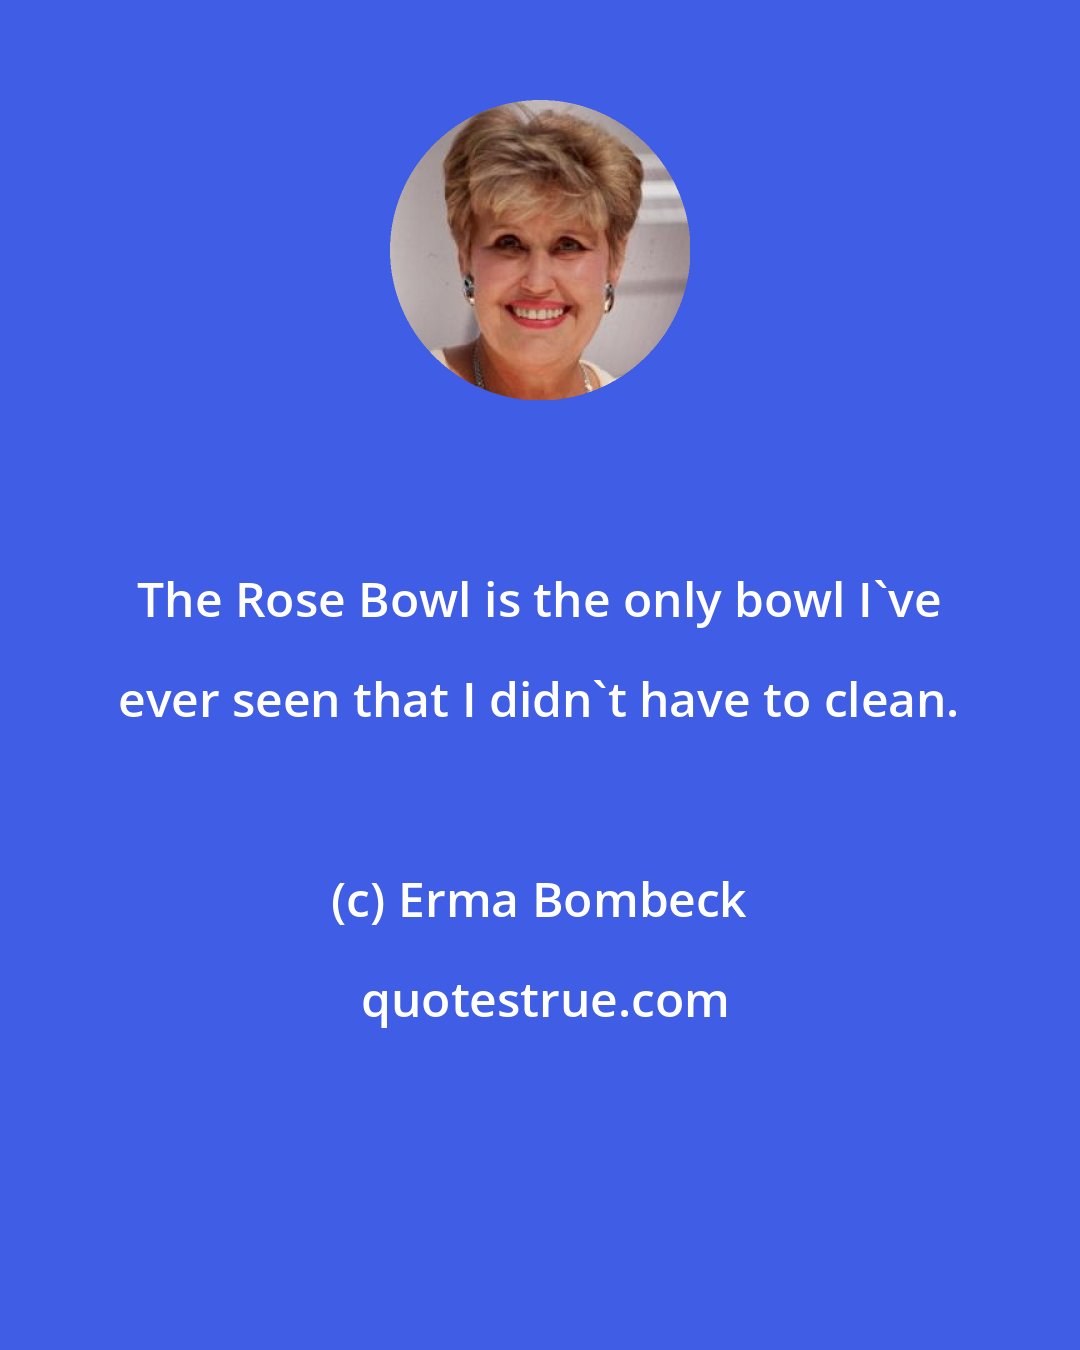 Erma Bombeck: The Rose Bowl is the only bowl I've ever seen that I didn't have to clean.